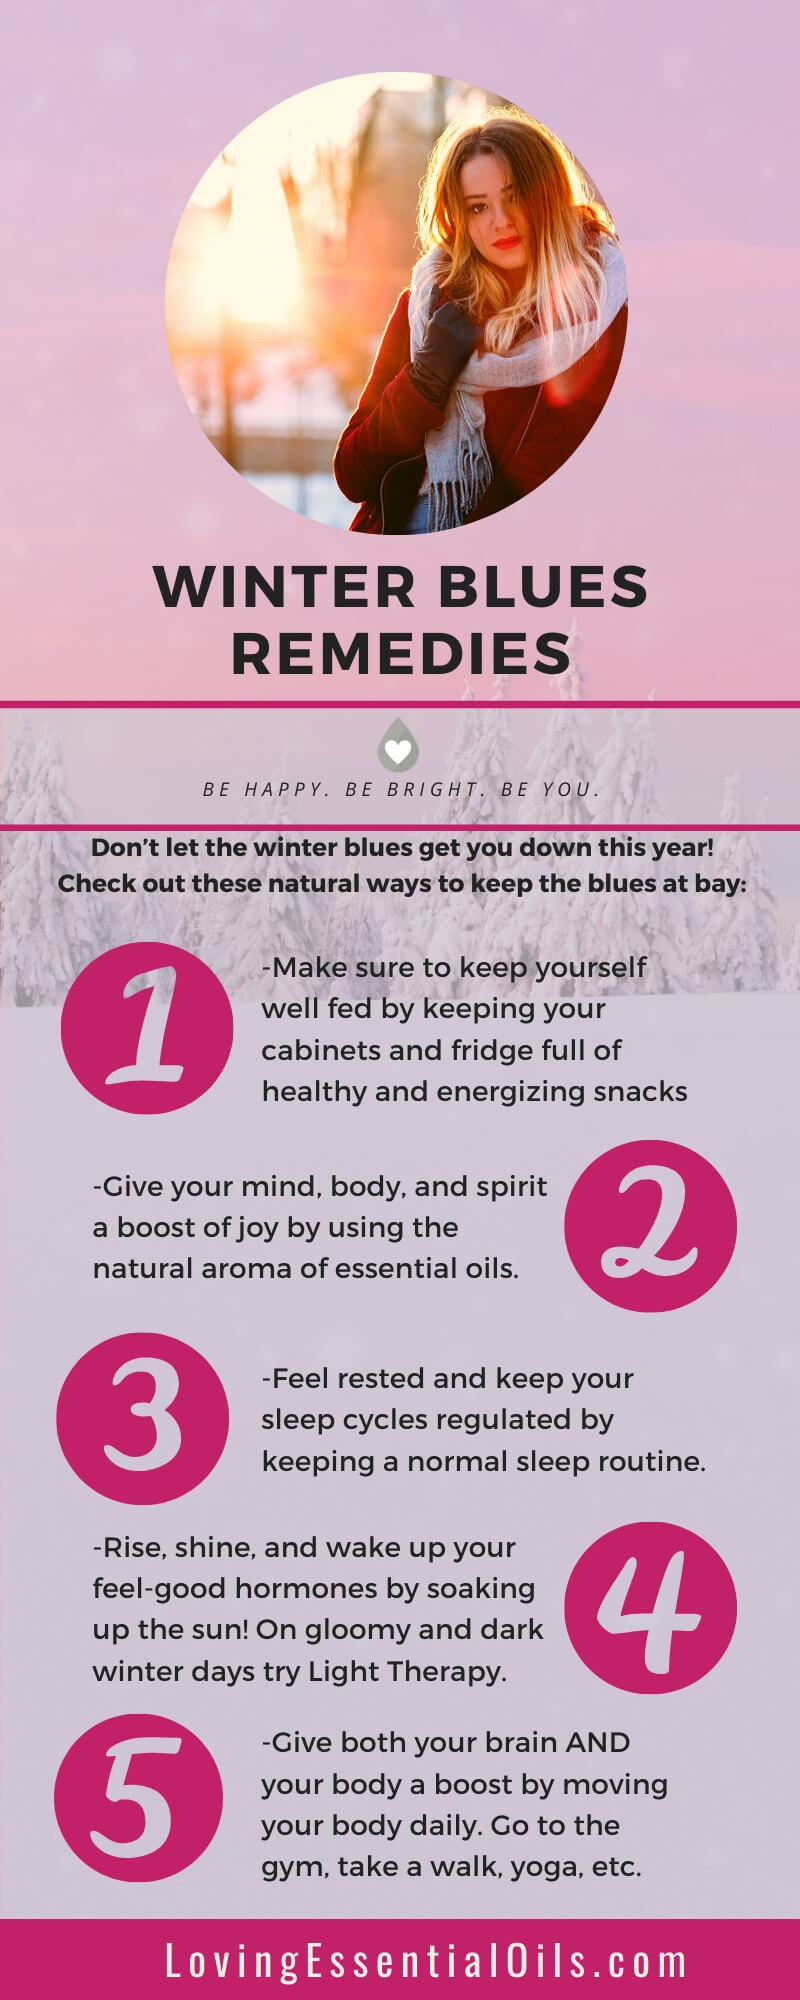 Essential oils and natural remedies for winter blues by Loving Essential Oils